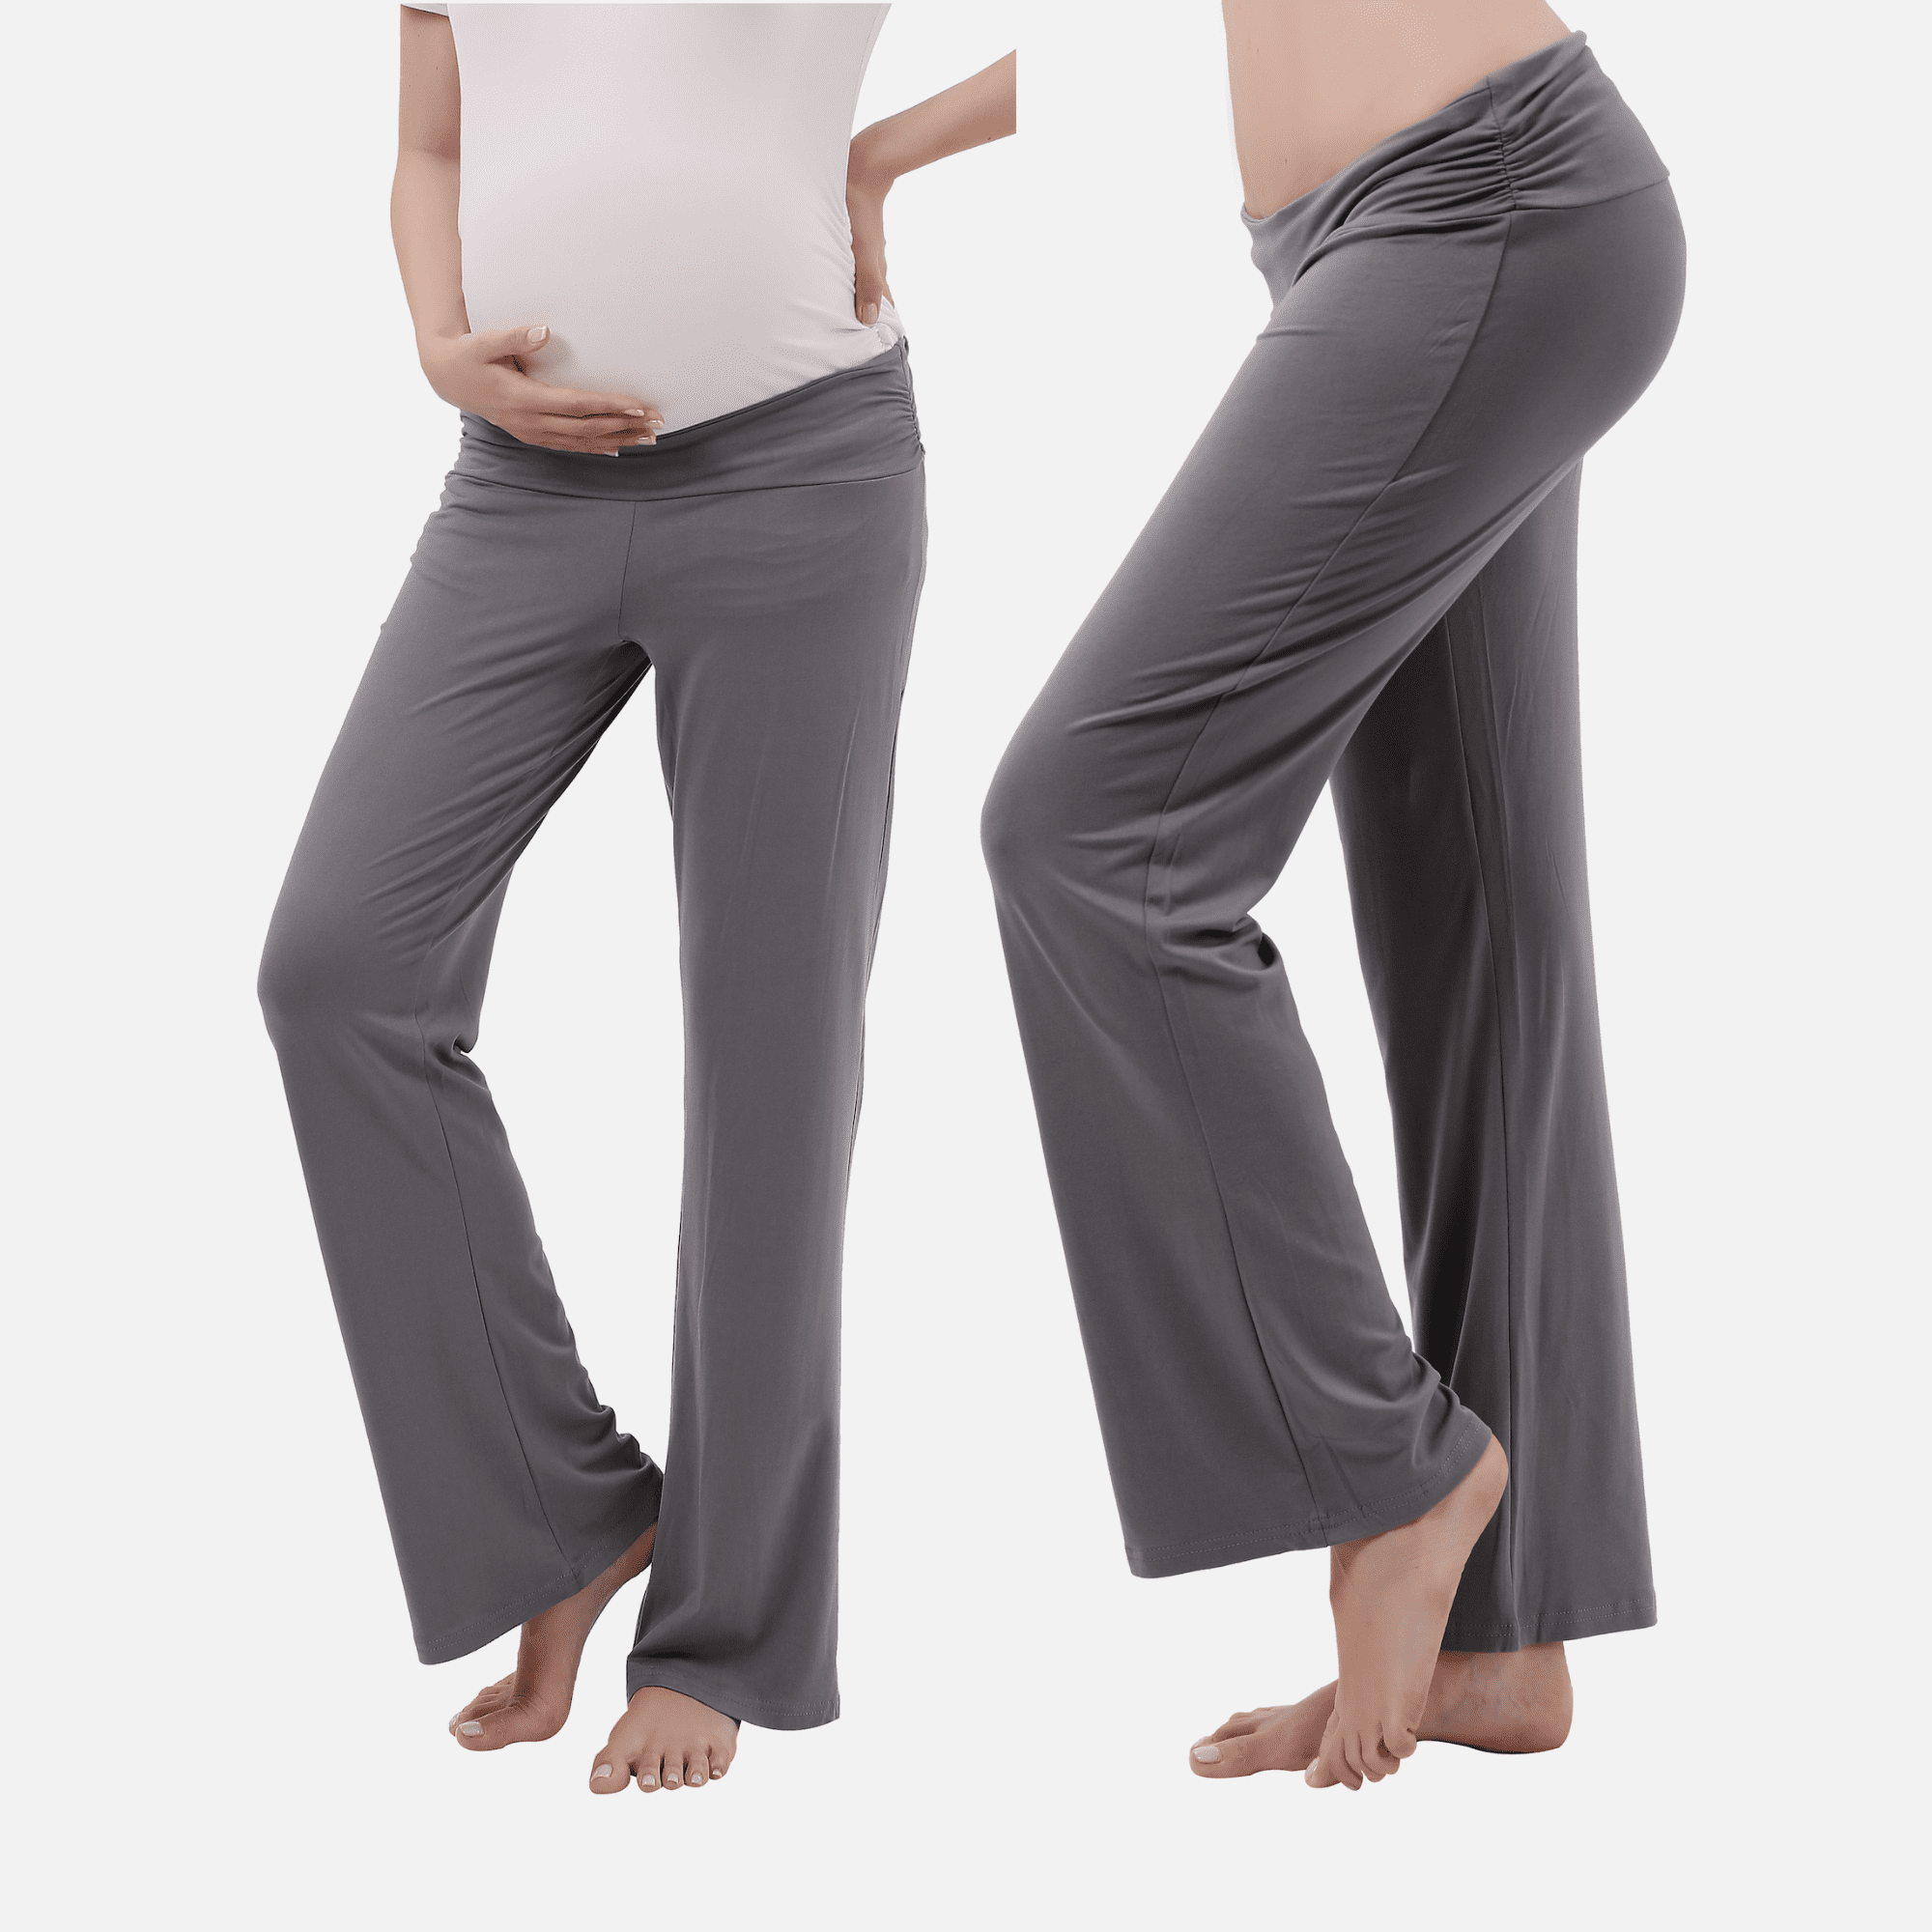 Women Maternity Pants Stretchy Comfy Wide Soft Palazzo Elastic Pregnancy Lounge Trousers 